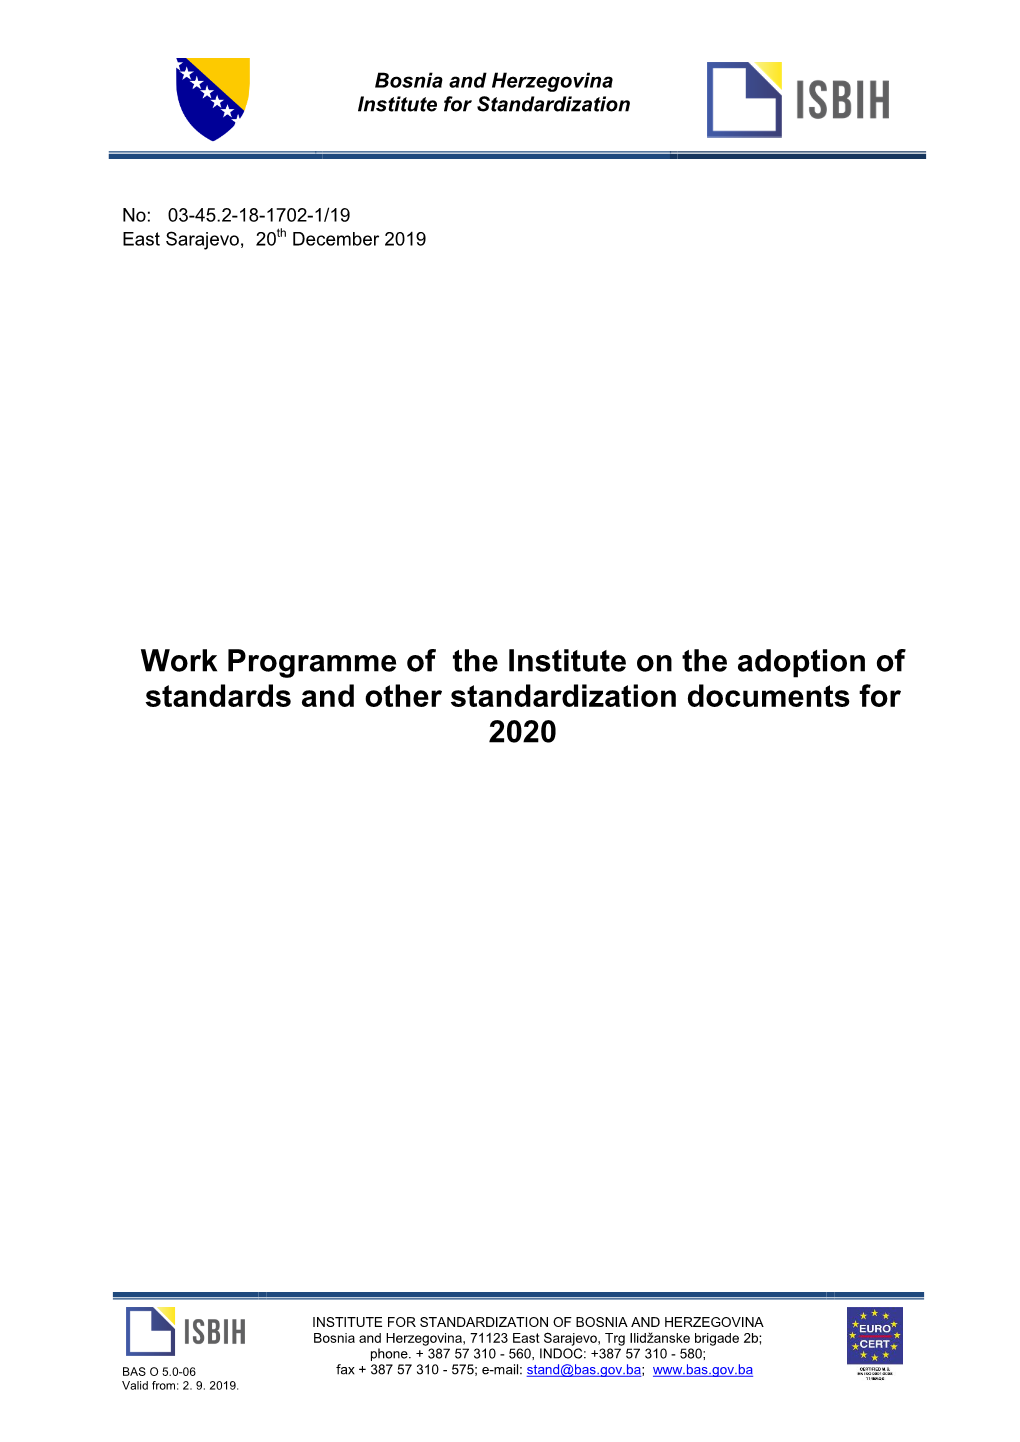 Work Programme of the Institute on the Adoption of Standards and Other Standardization Documents for 2020